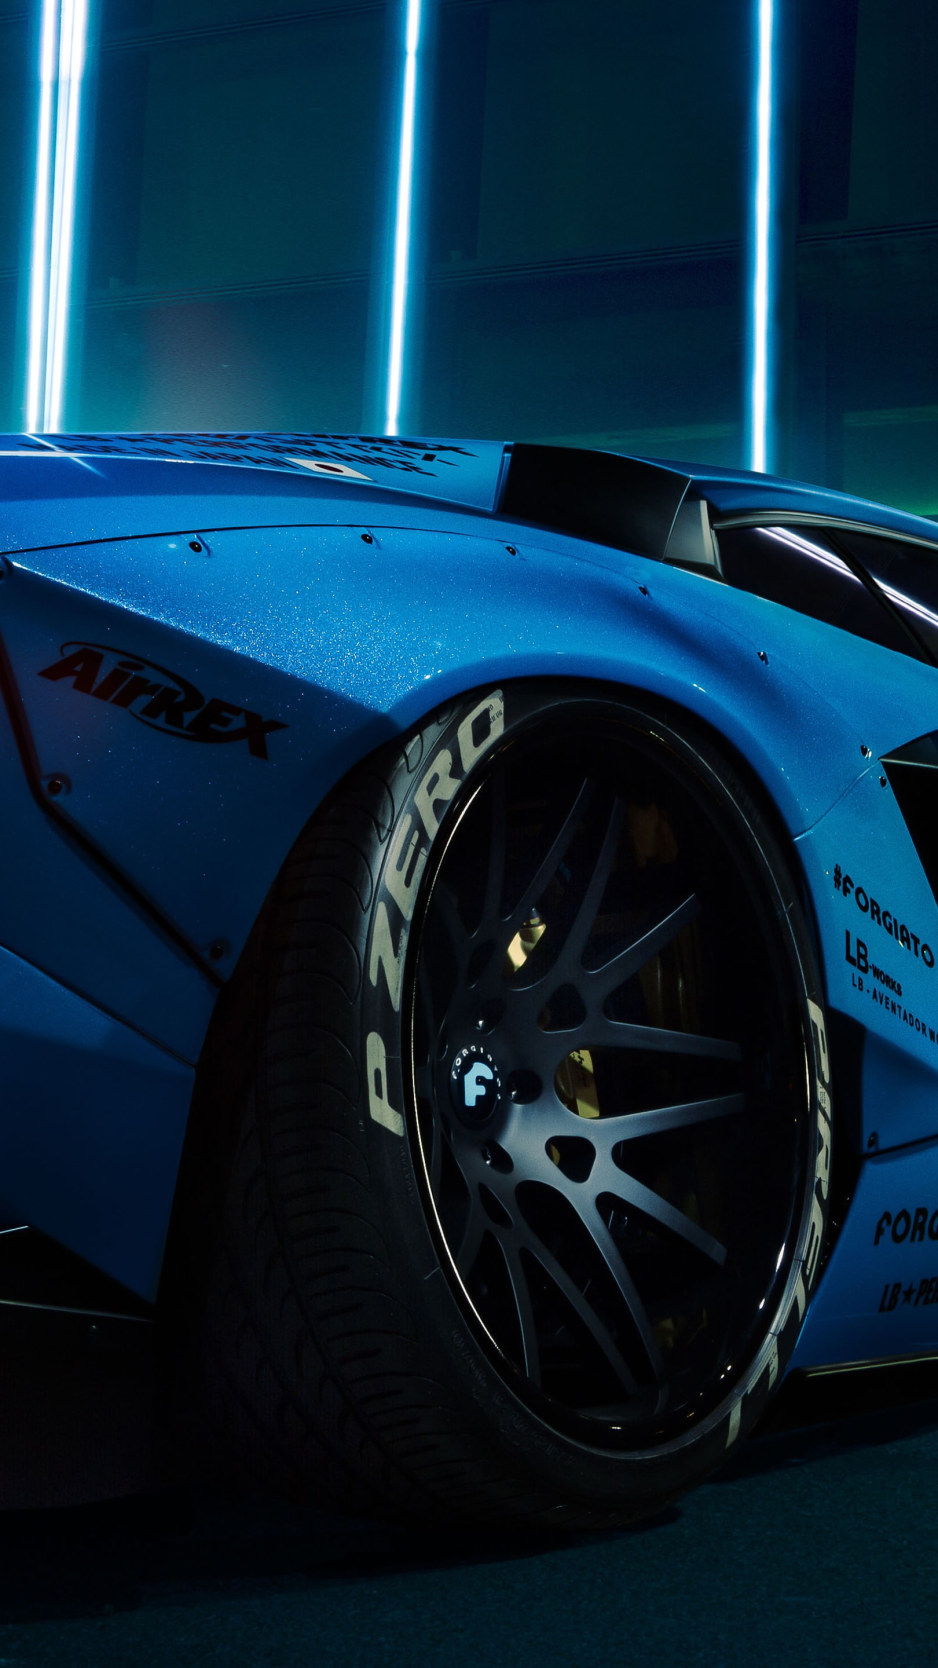 Blue Supercars Wallpapers